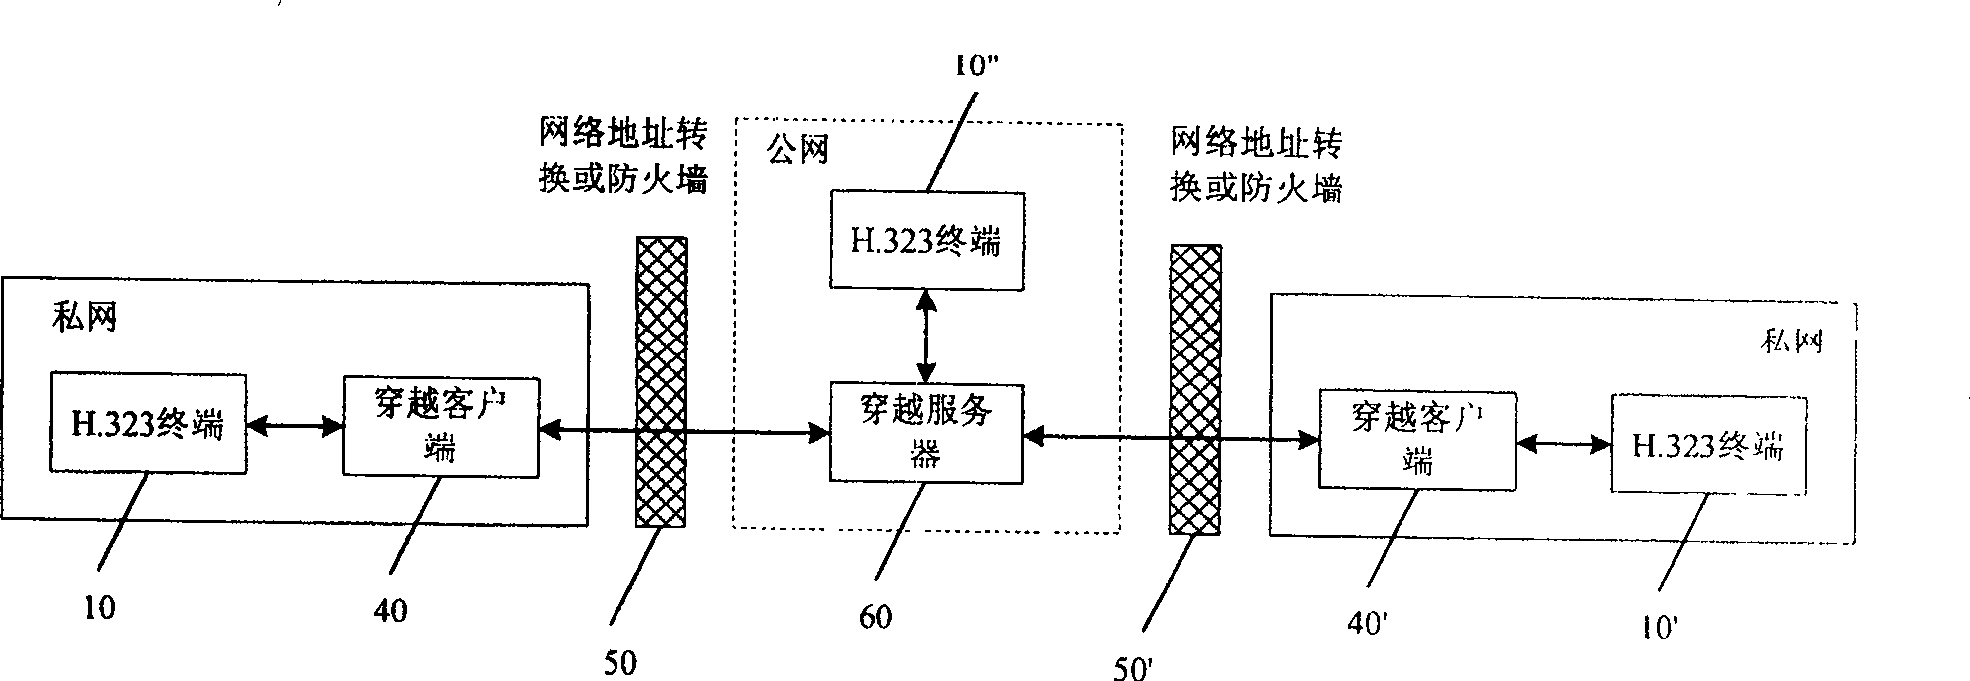 Processing system of IP multi-media communication service and the method for IP multi-media communication